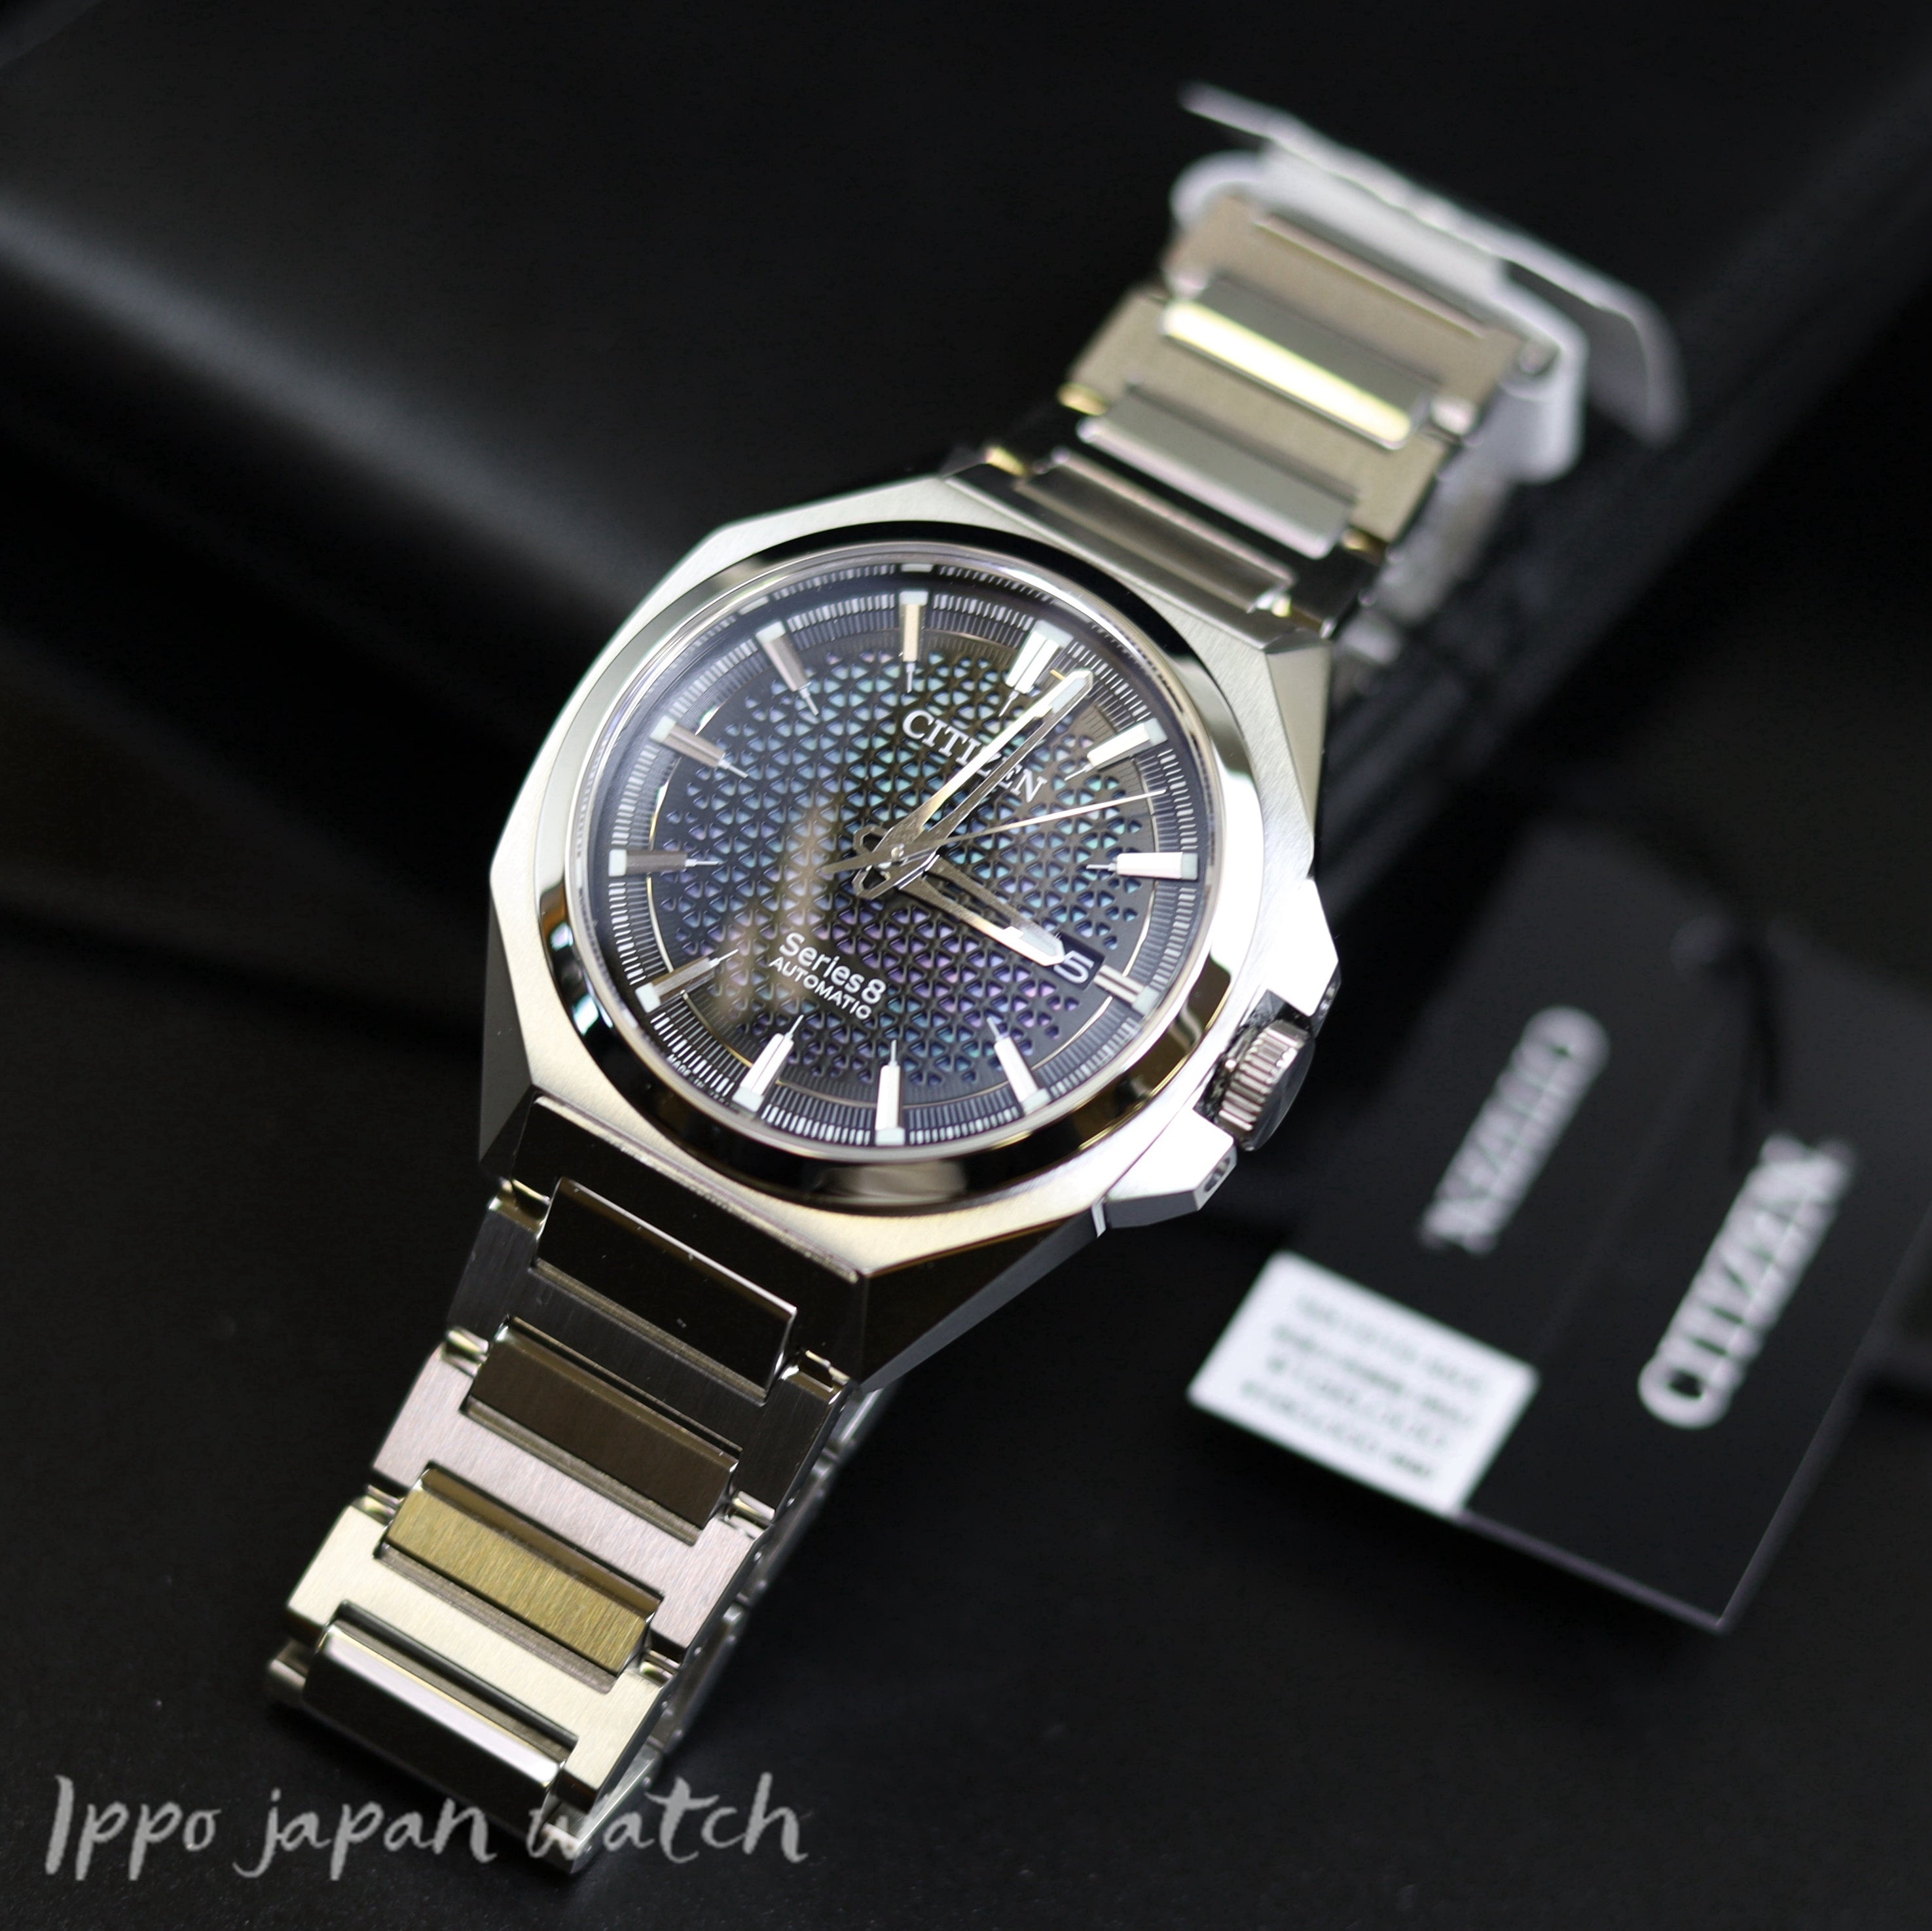 Citizen Series8 NA1010-84X Automatic 10 ATM Watch - IPPO JAPAN WATCH 